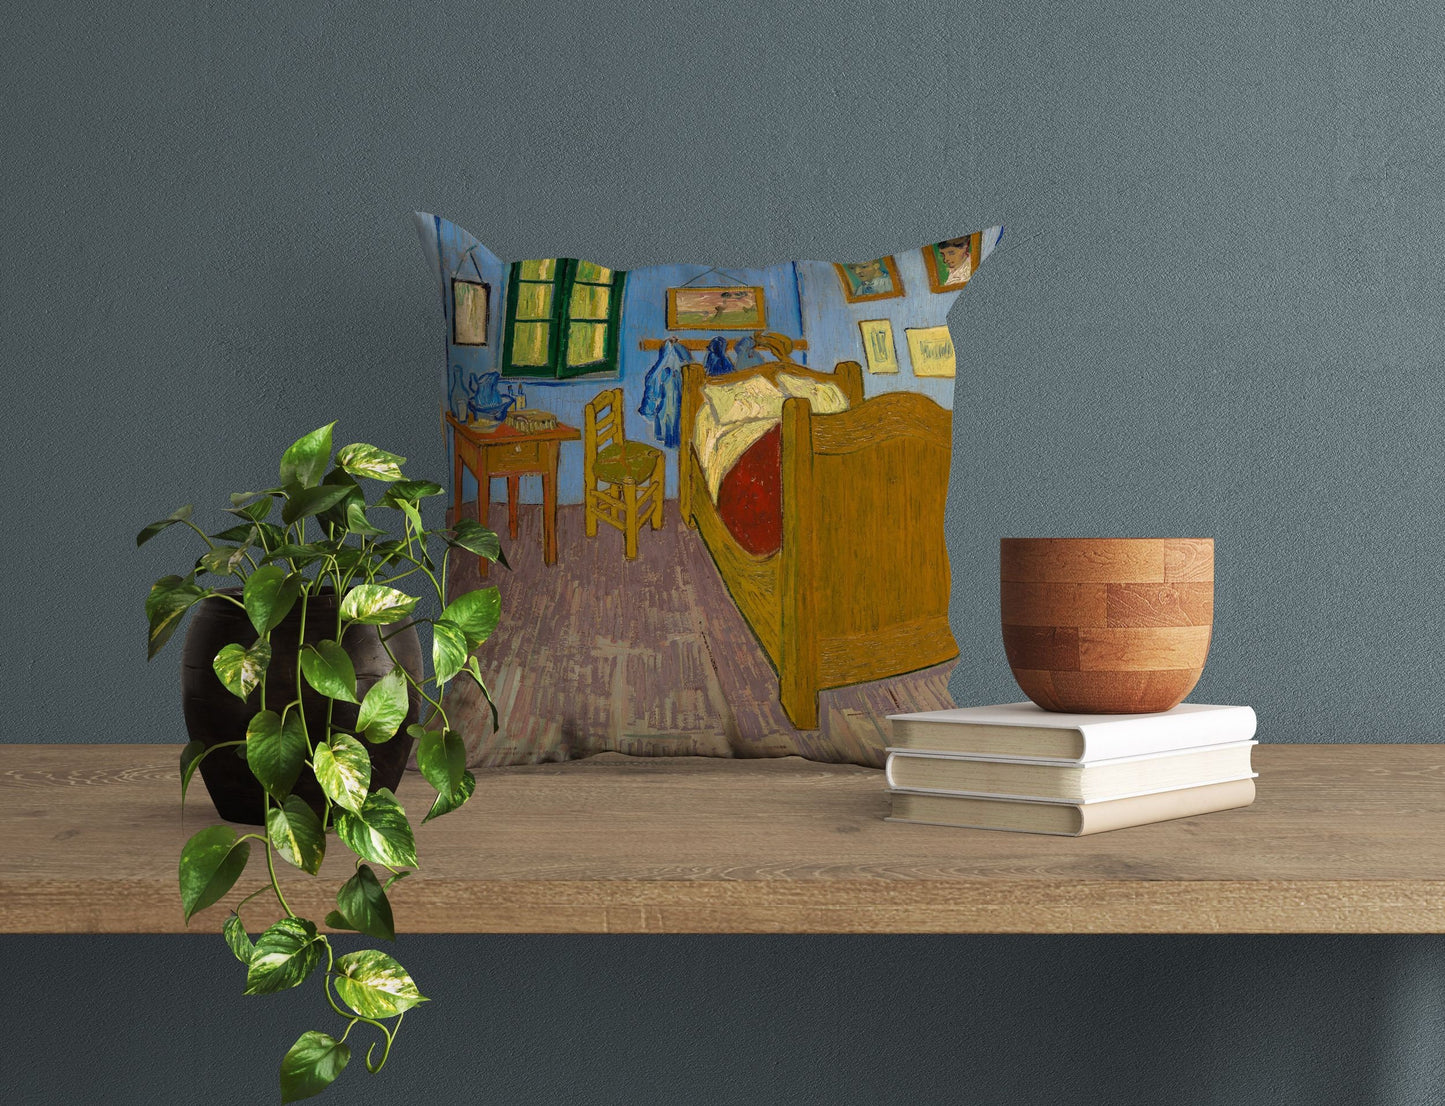 Vincent Van Gogh Famous Painting The Bedroom In Arles, Throw Pillow Cover, Abstract Pillow, Designer Pillow, Contemporary Pillow